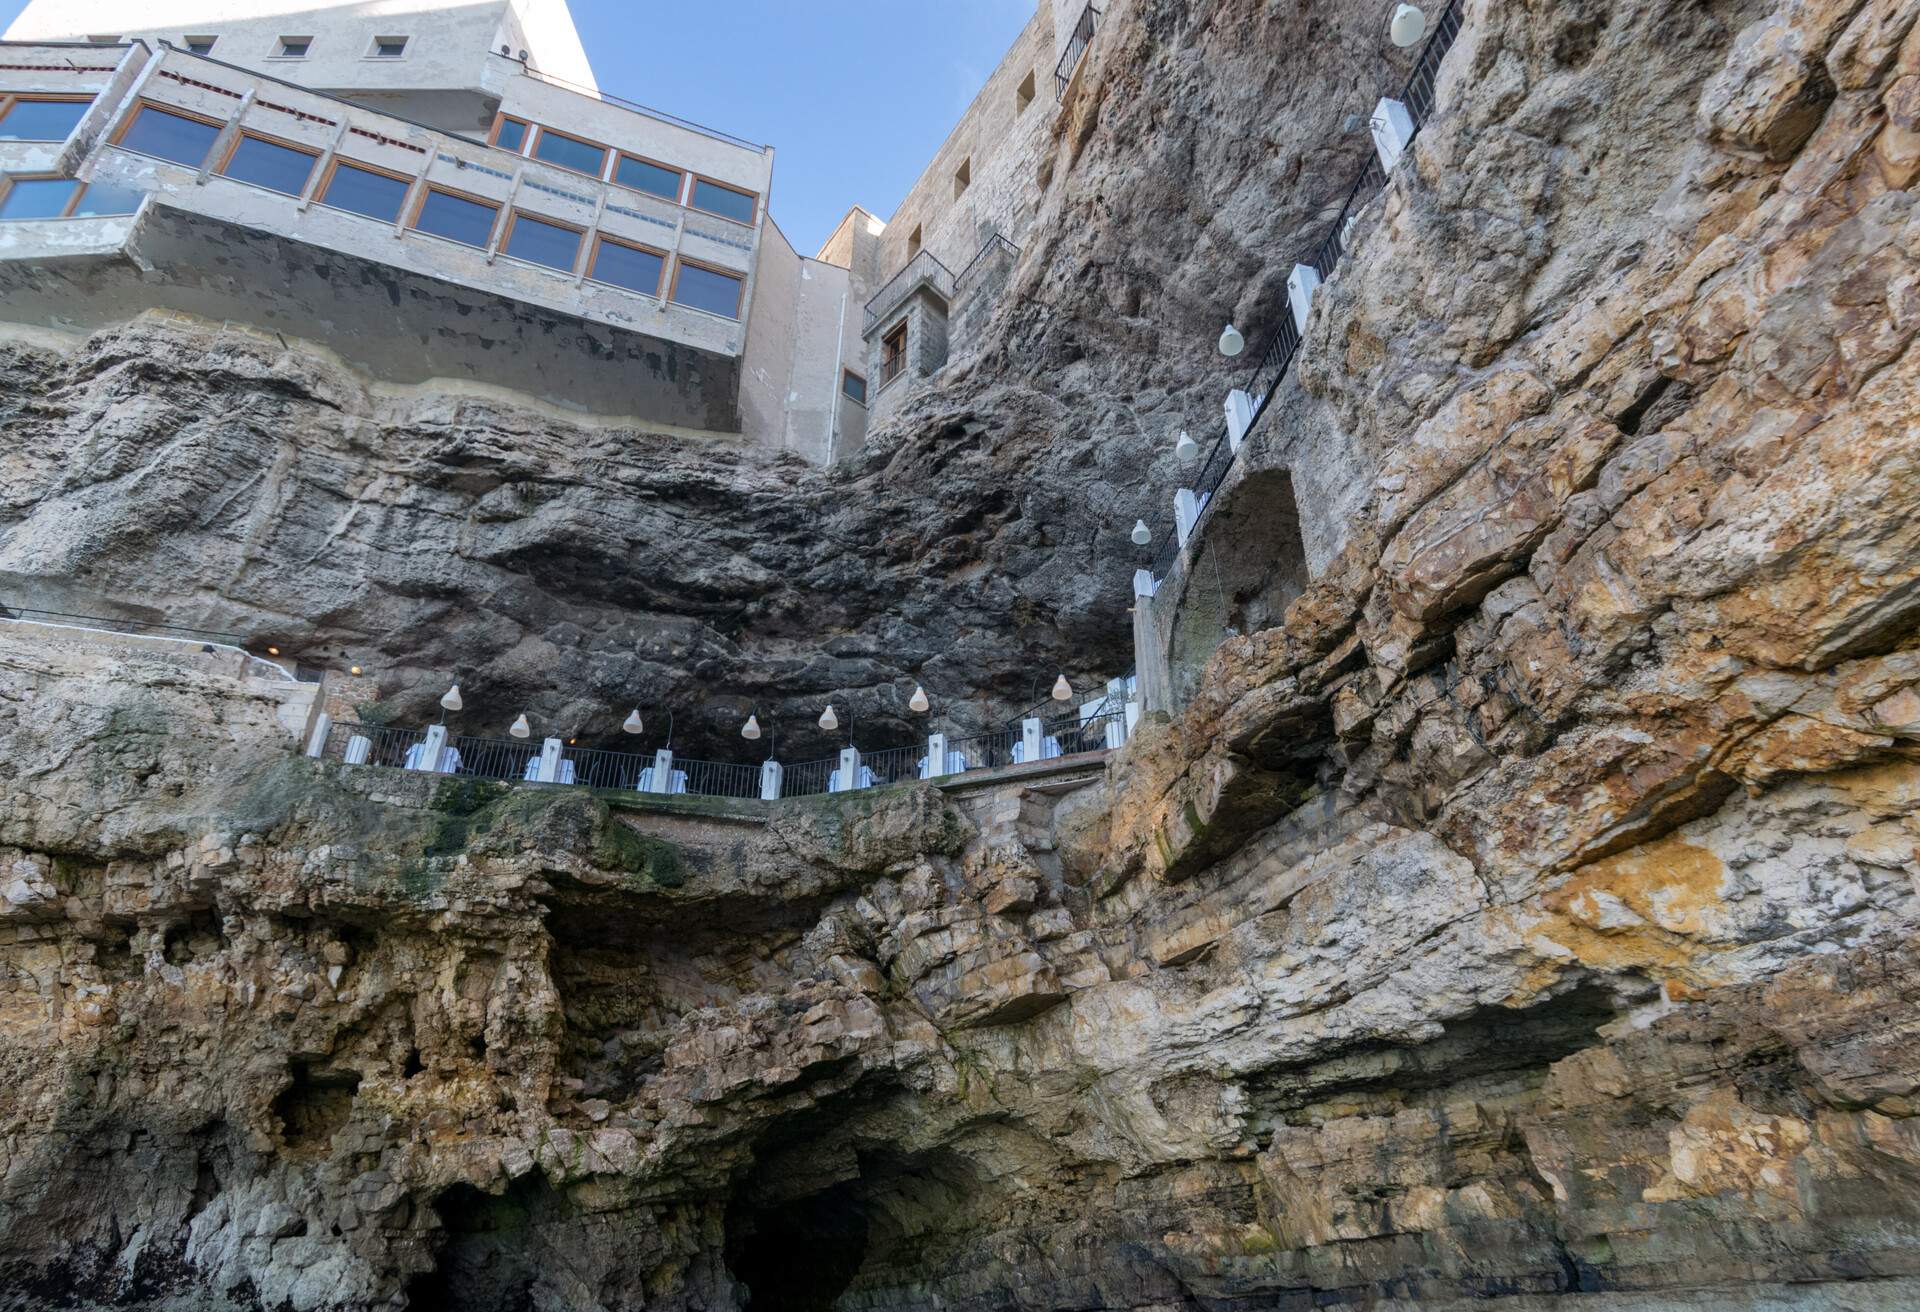 POLIGNANO, ITALY - 16 AUg 2016: The seafront entrance of Grotta Palazzese, a natural sea cave now part of a high end restaurant, in Polignano a Mare, Apulia, Italy